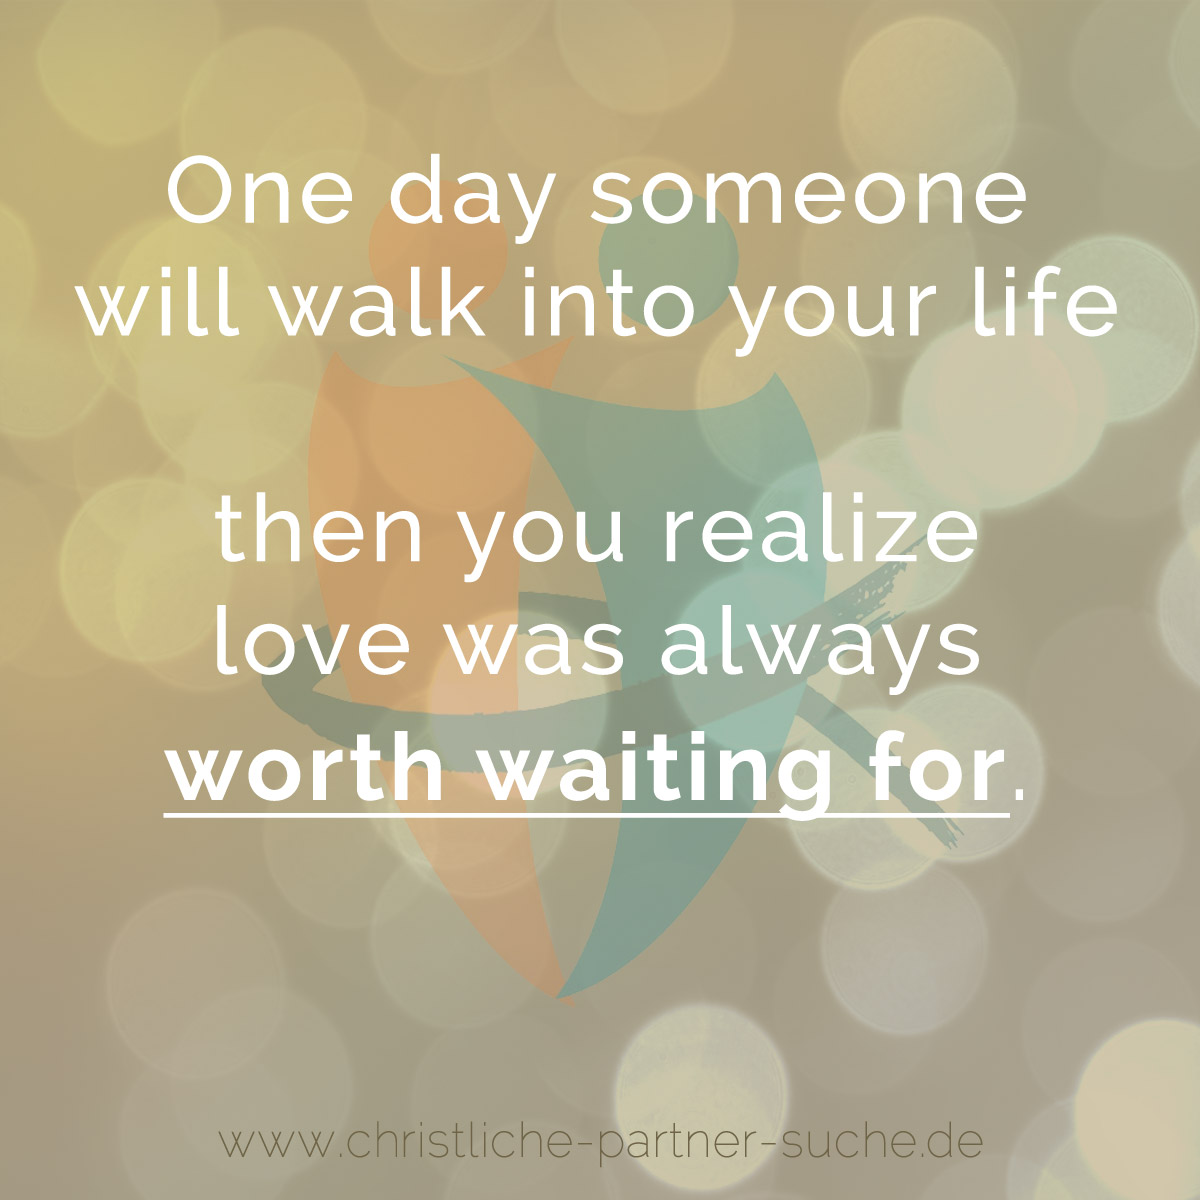 One day someone will walk into your life